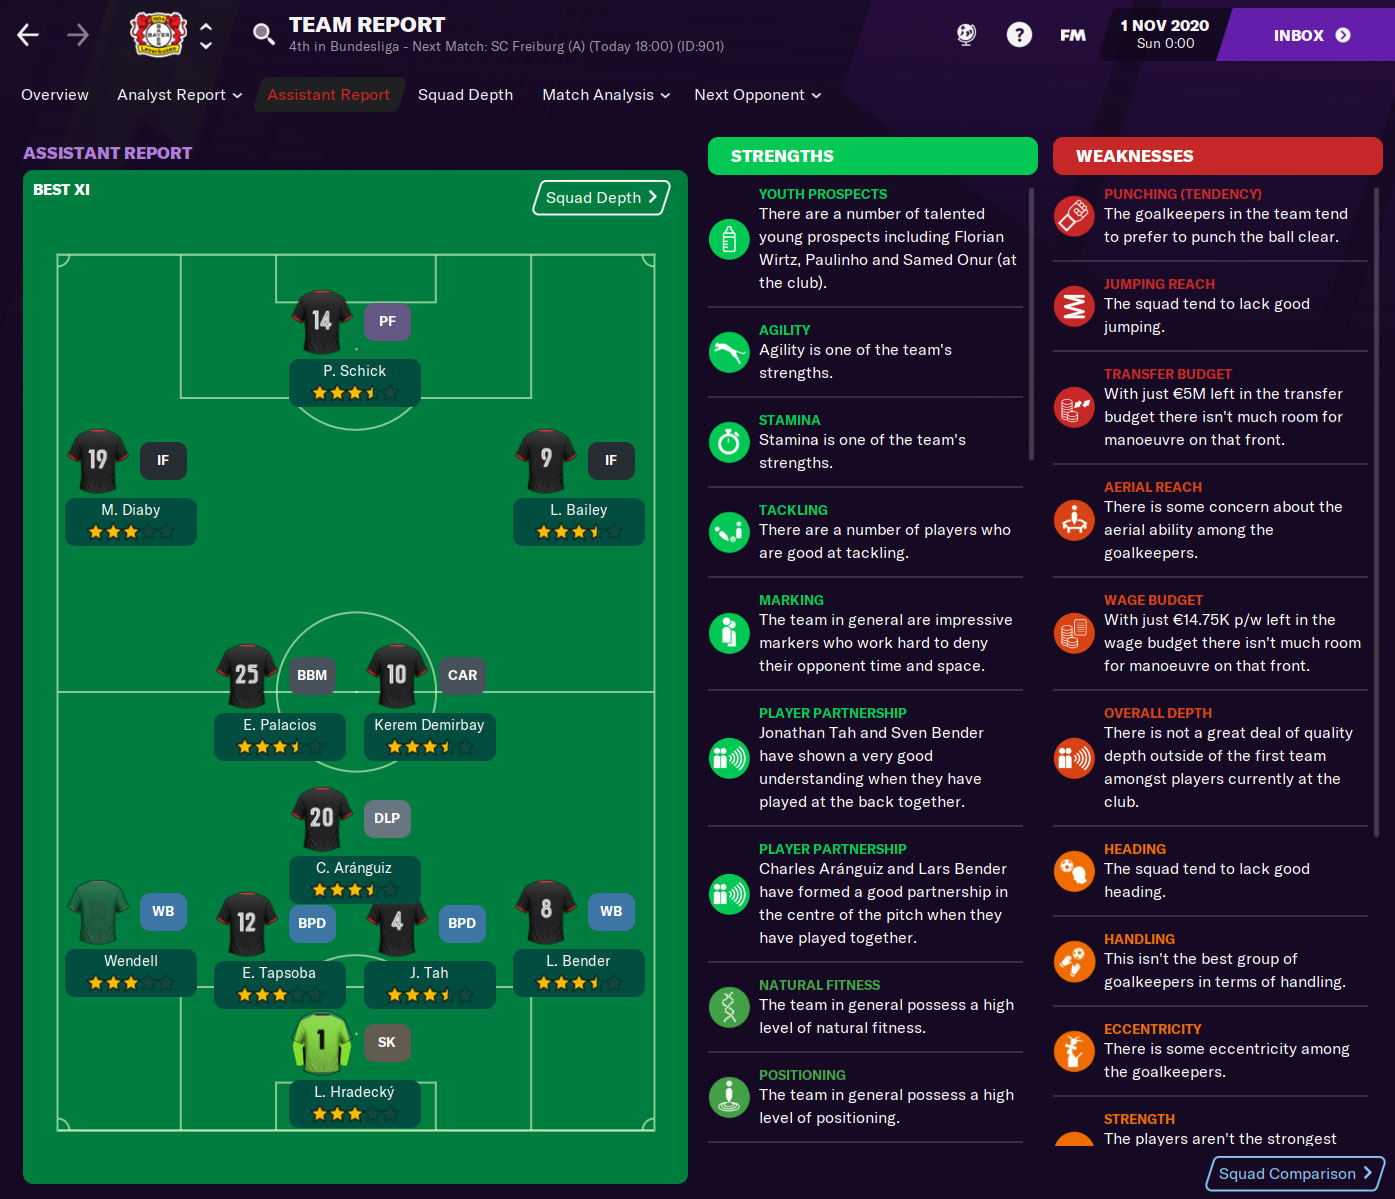 FM22, Create your PERFECT Tactic with this Web App